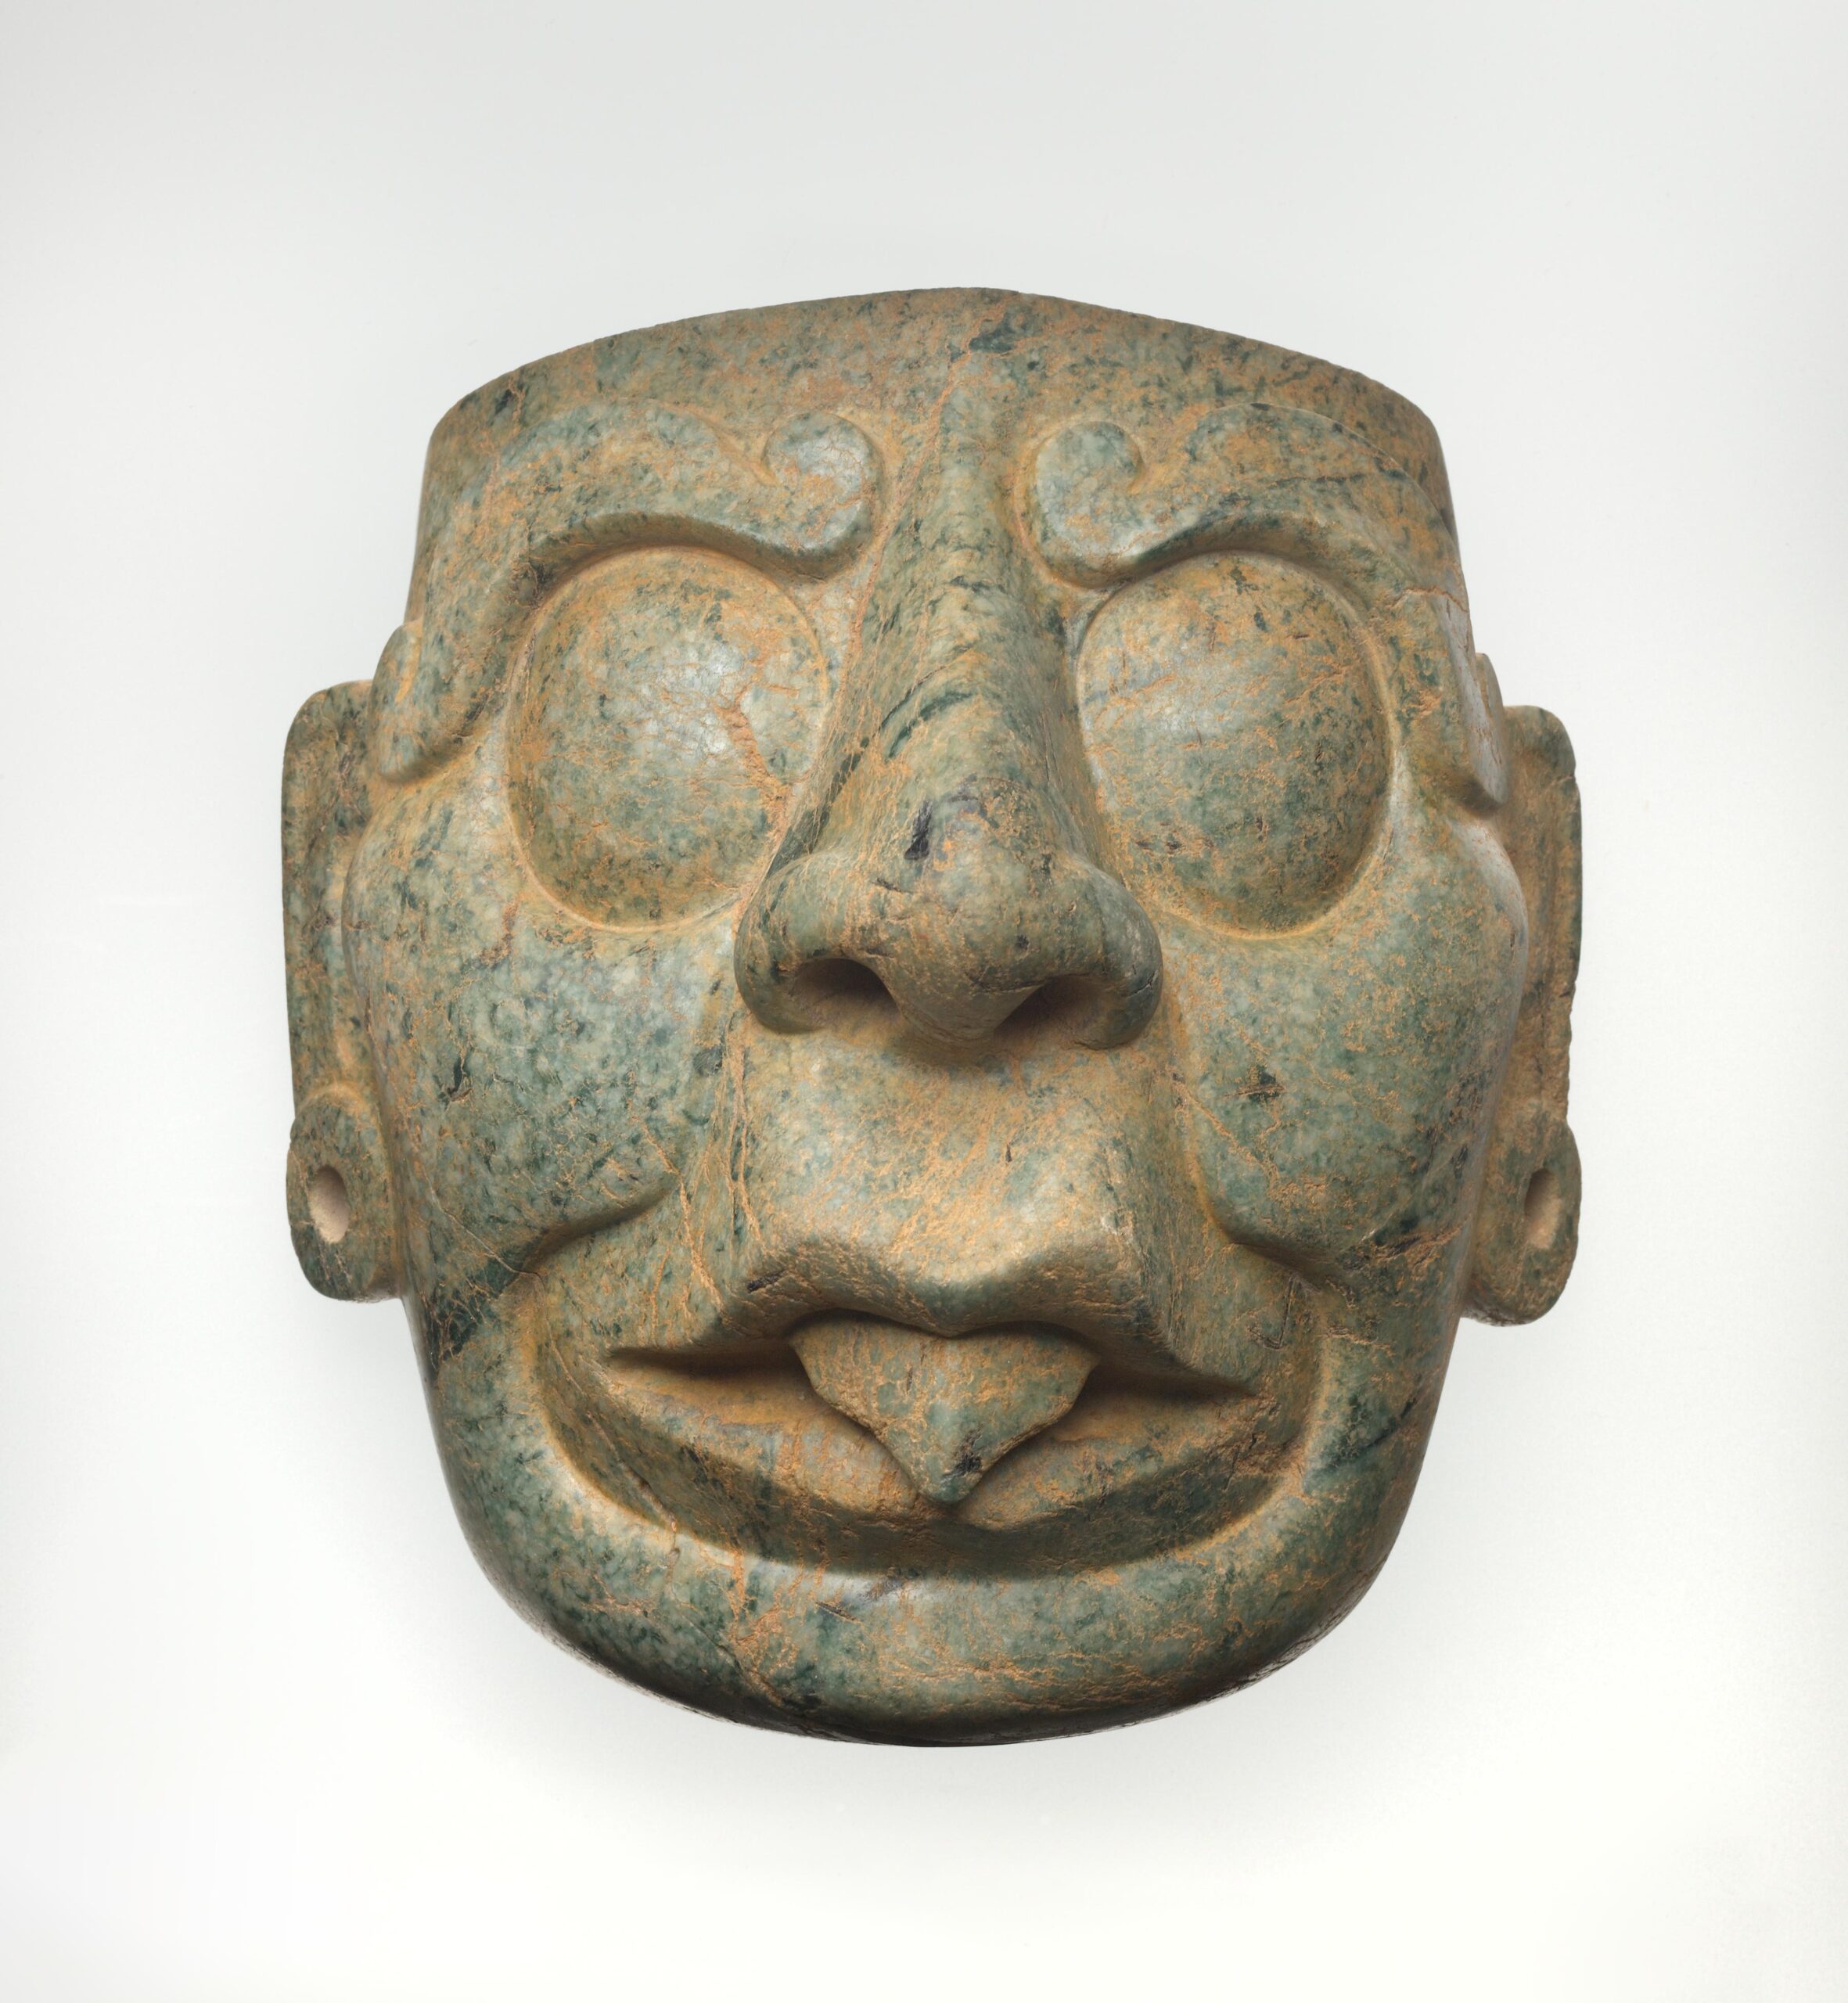 Face mask with large eyes, a prominent nose, open mouth, ear spools, and extended tongue.